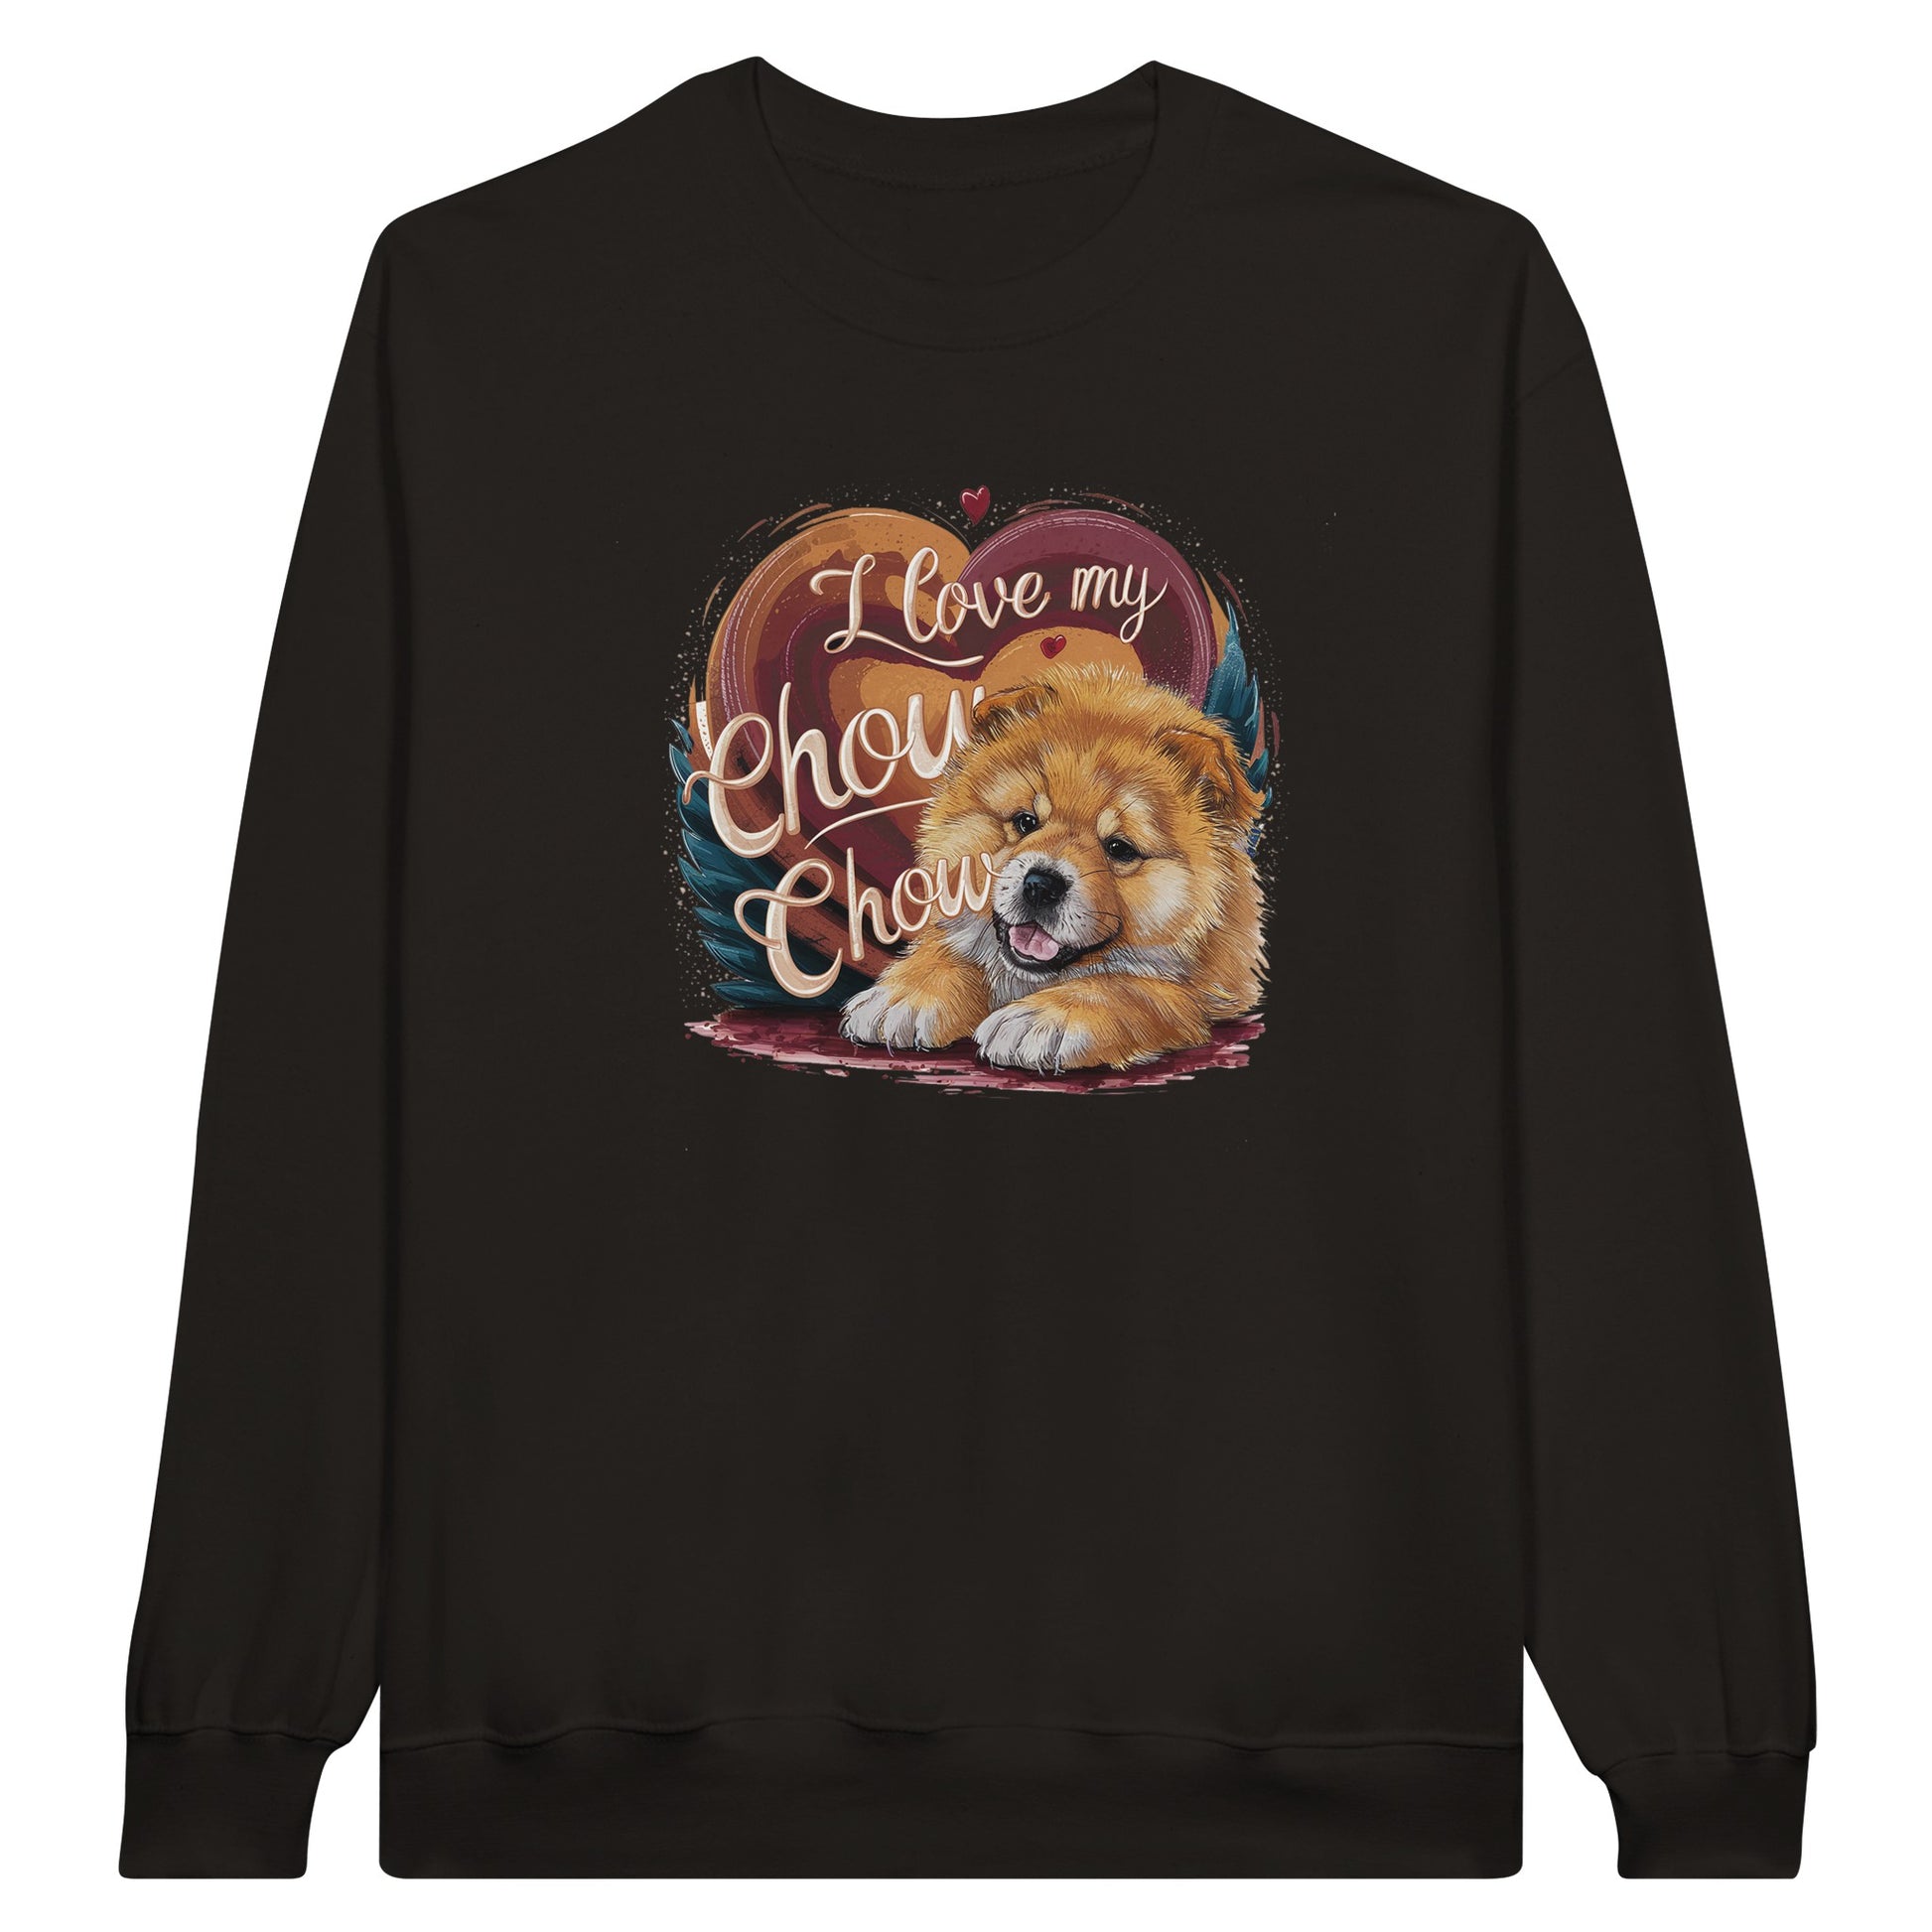 An unisex sweatshirt with a design with the phrase: "I love my Chow Chow" and a cute chow chow puppy. Shirt color is black